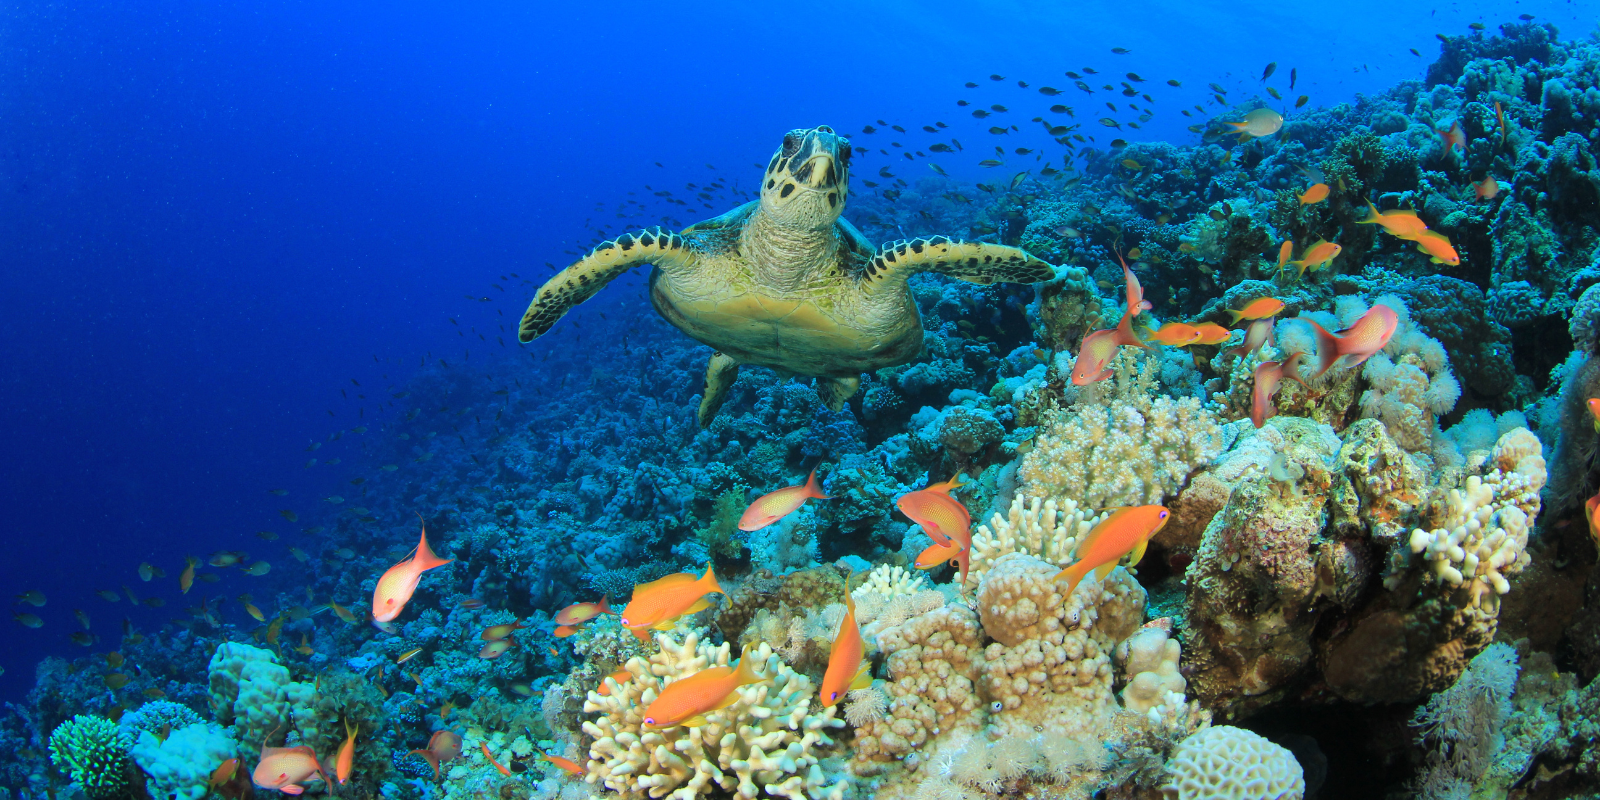 A photo of a sea turtle in a coral reef.